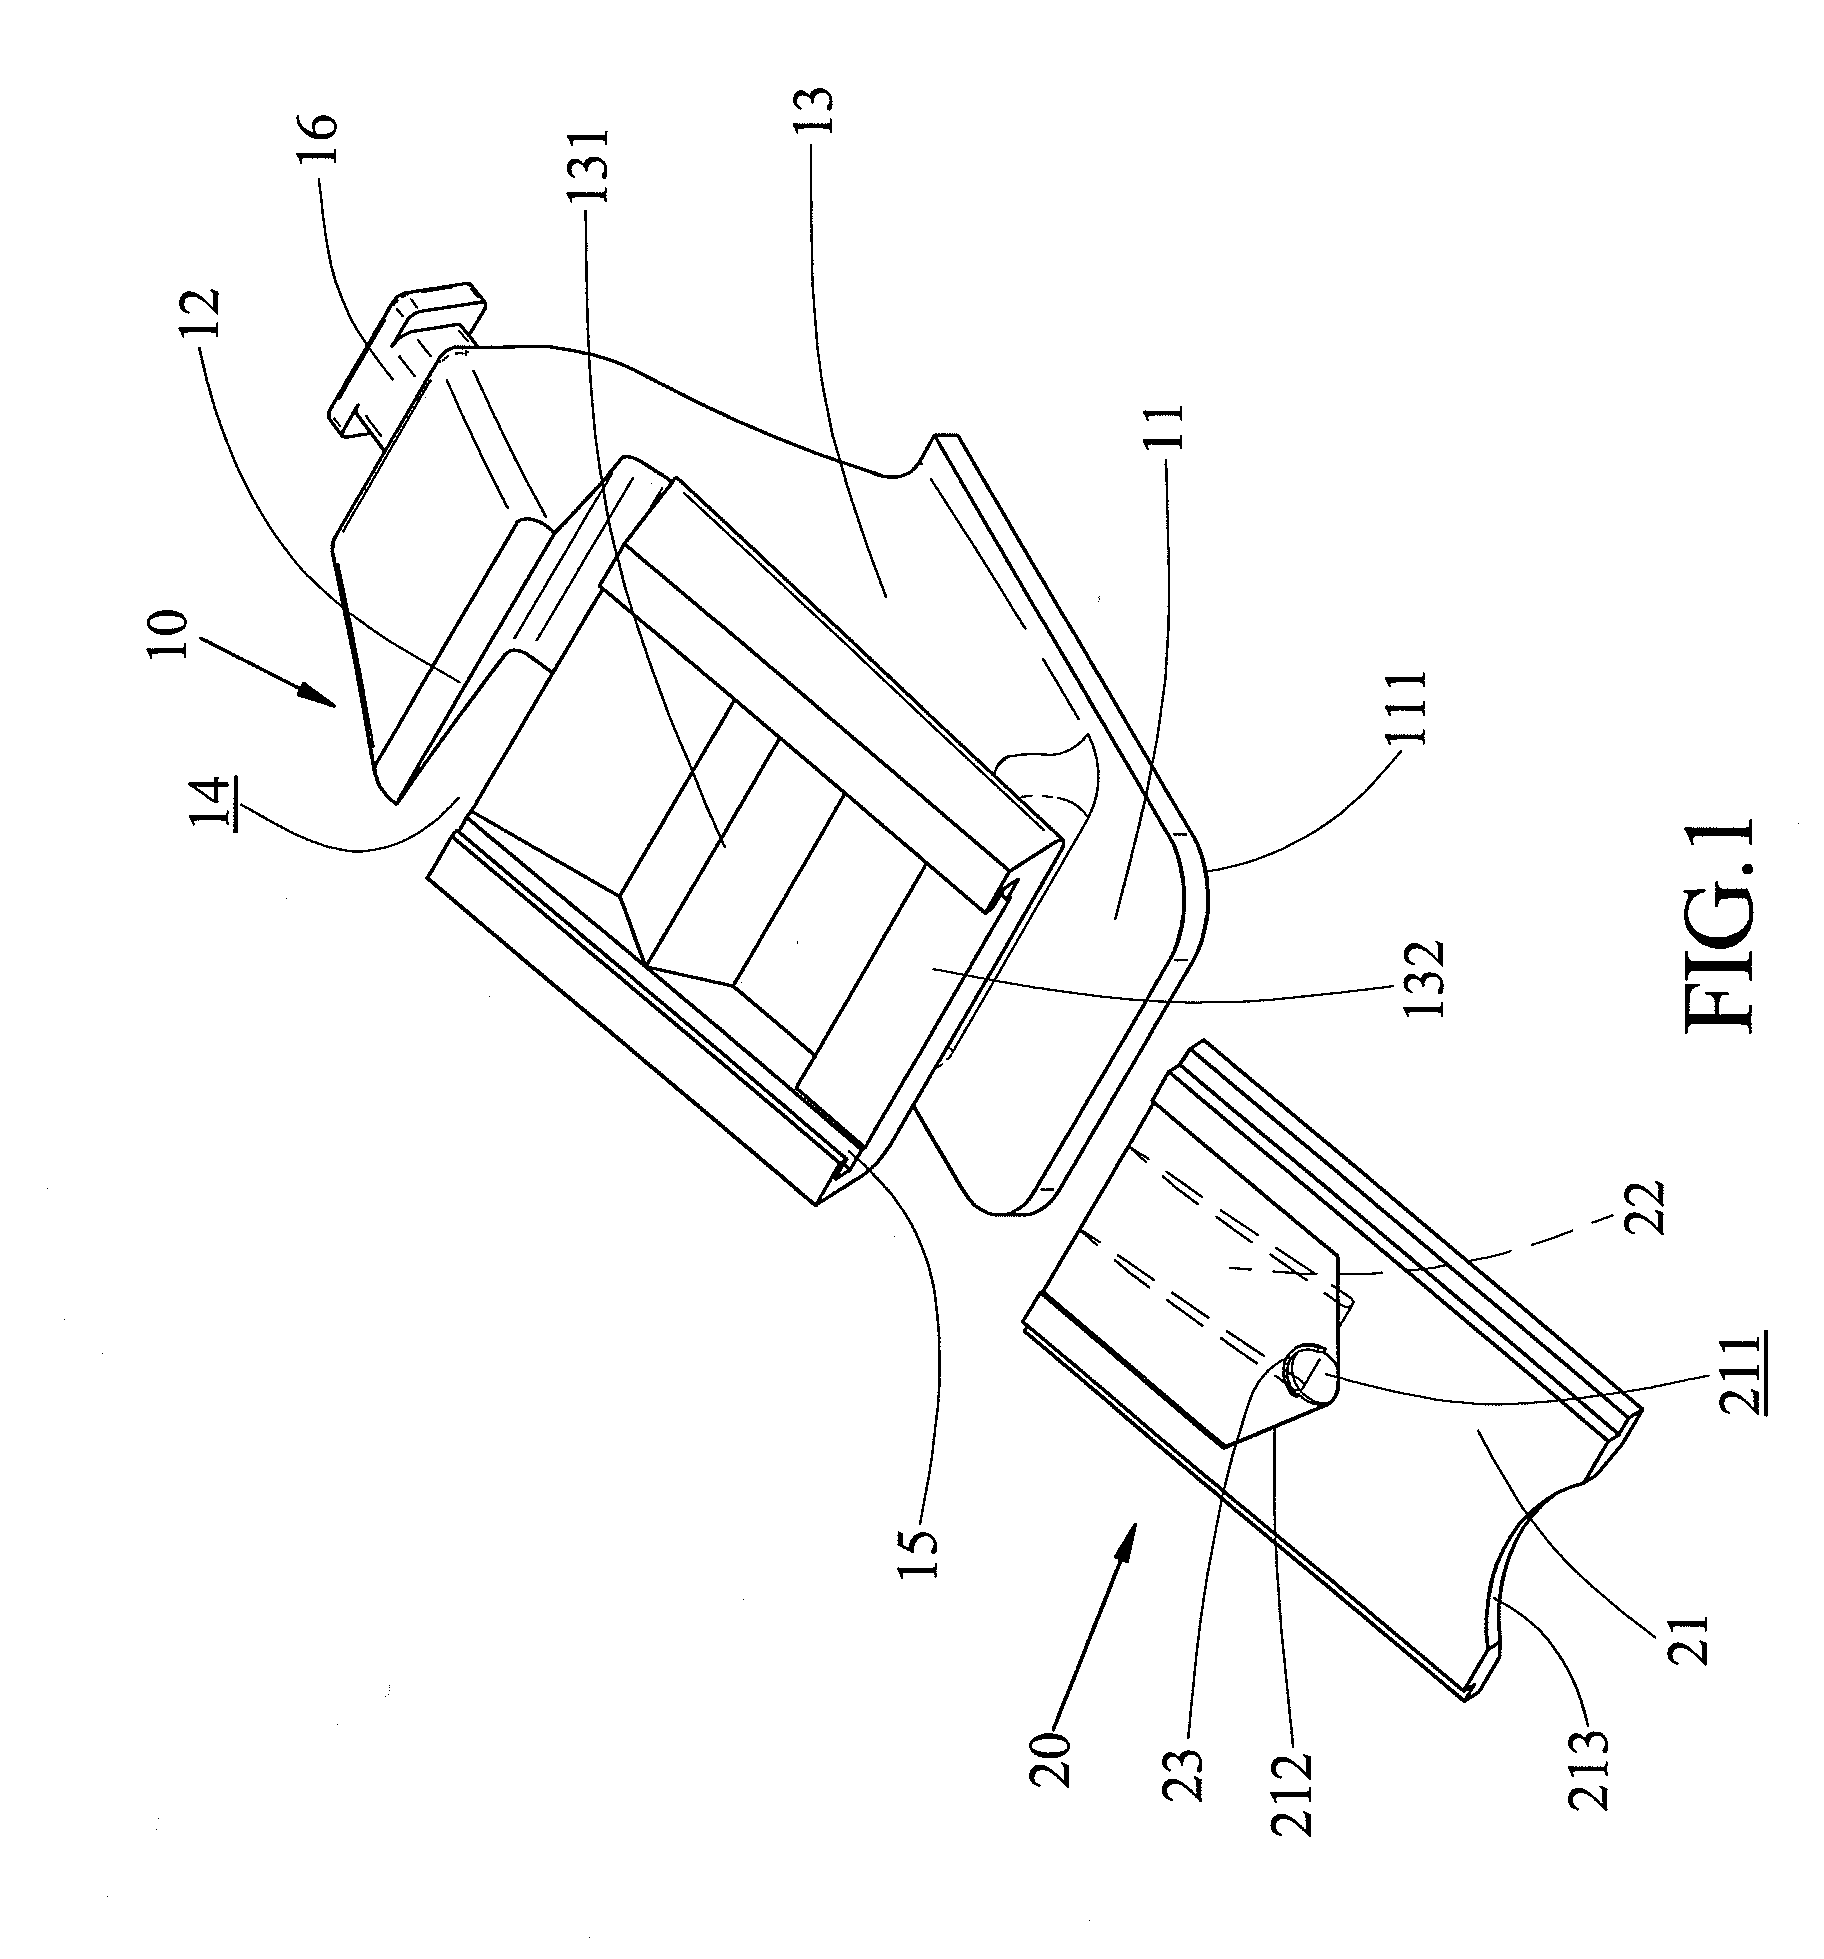 Dental Brace with Brackets Having a Latch Type Sliding Cover for Positioning Arch Wire